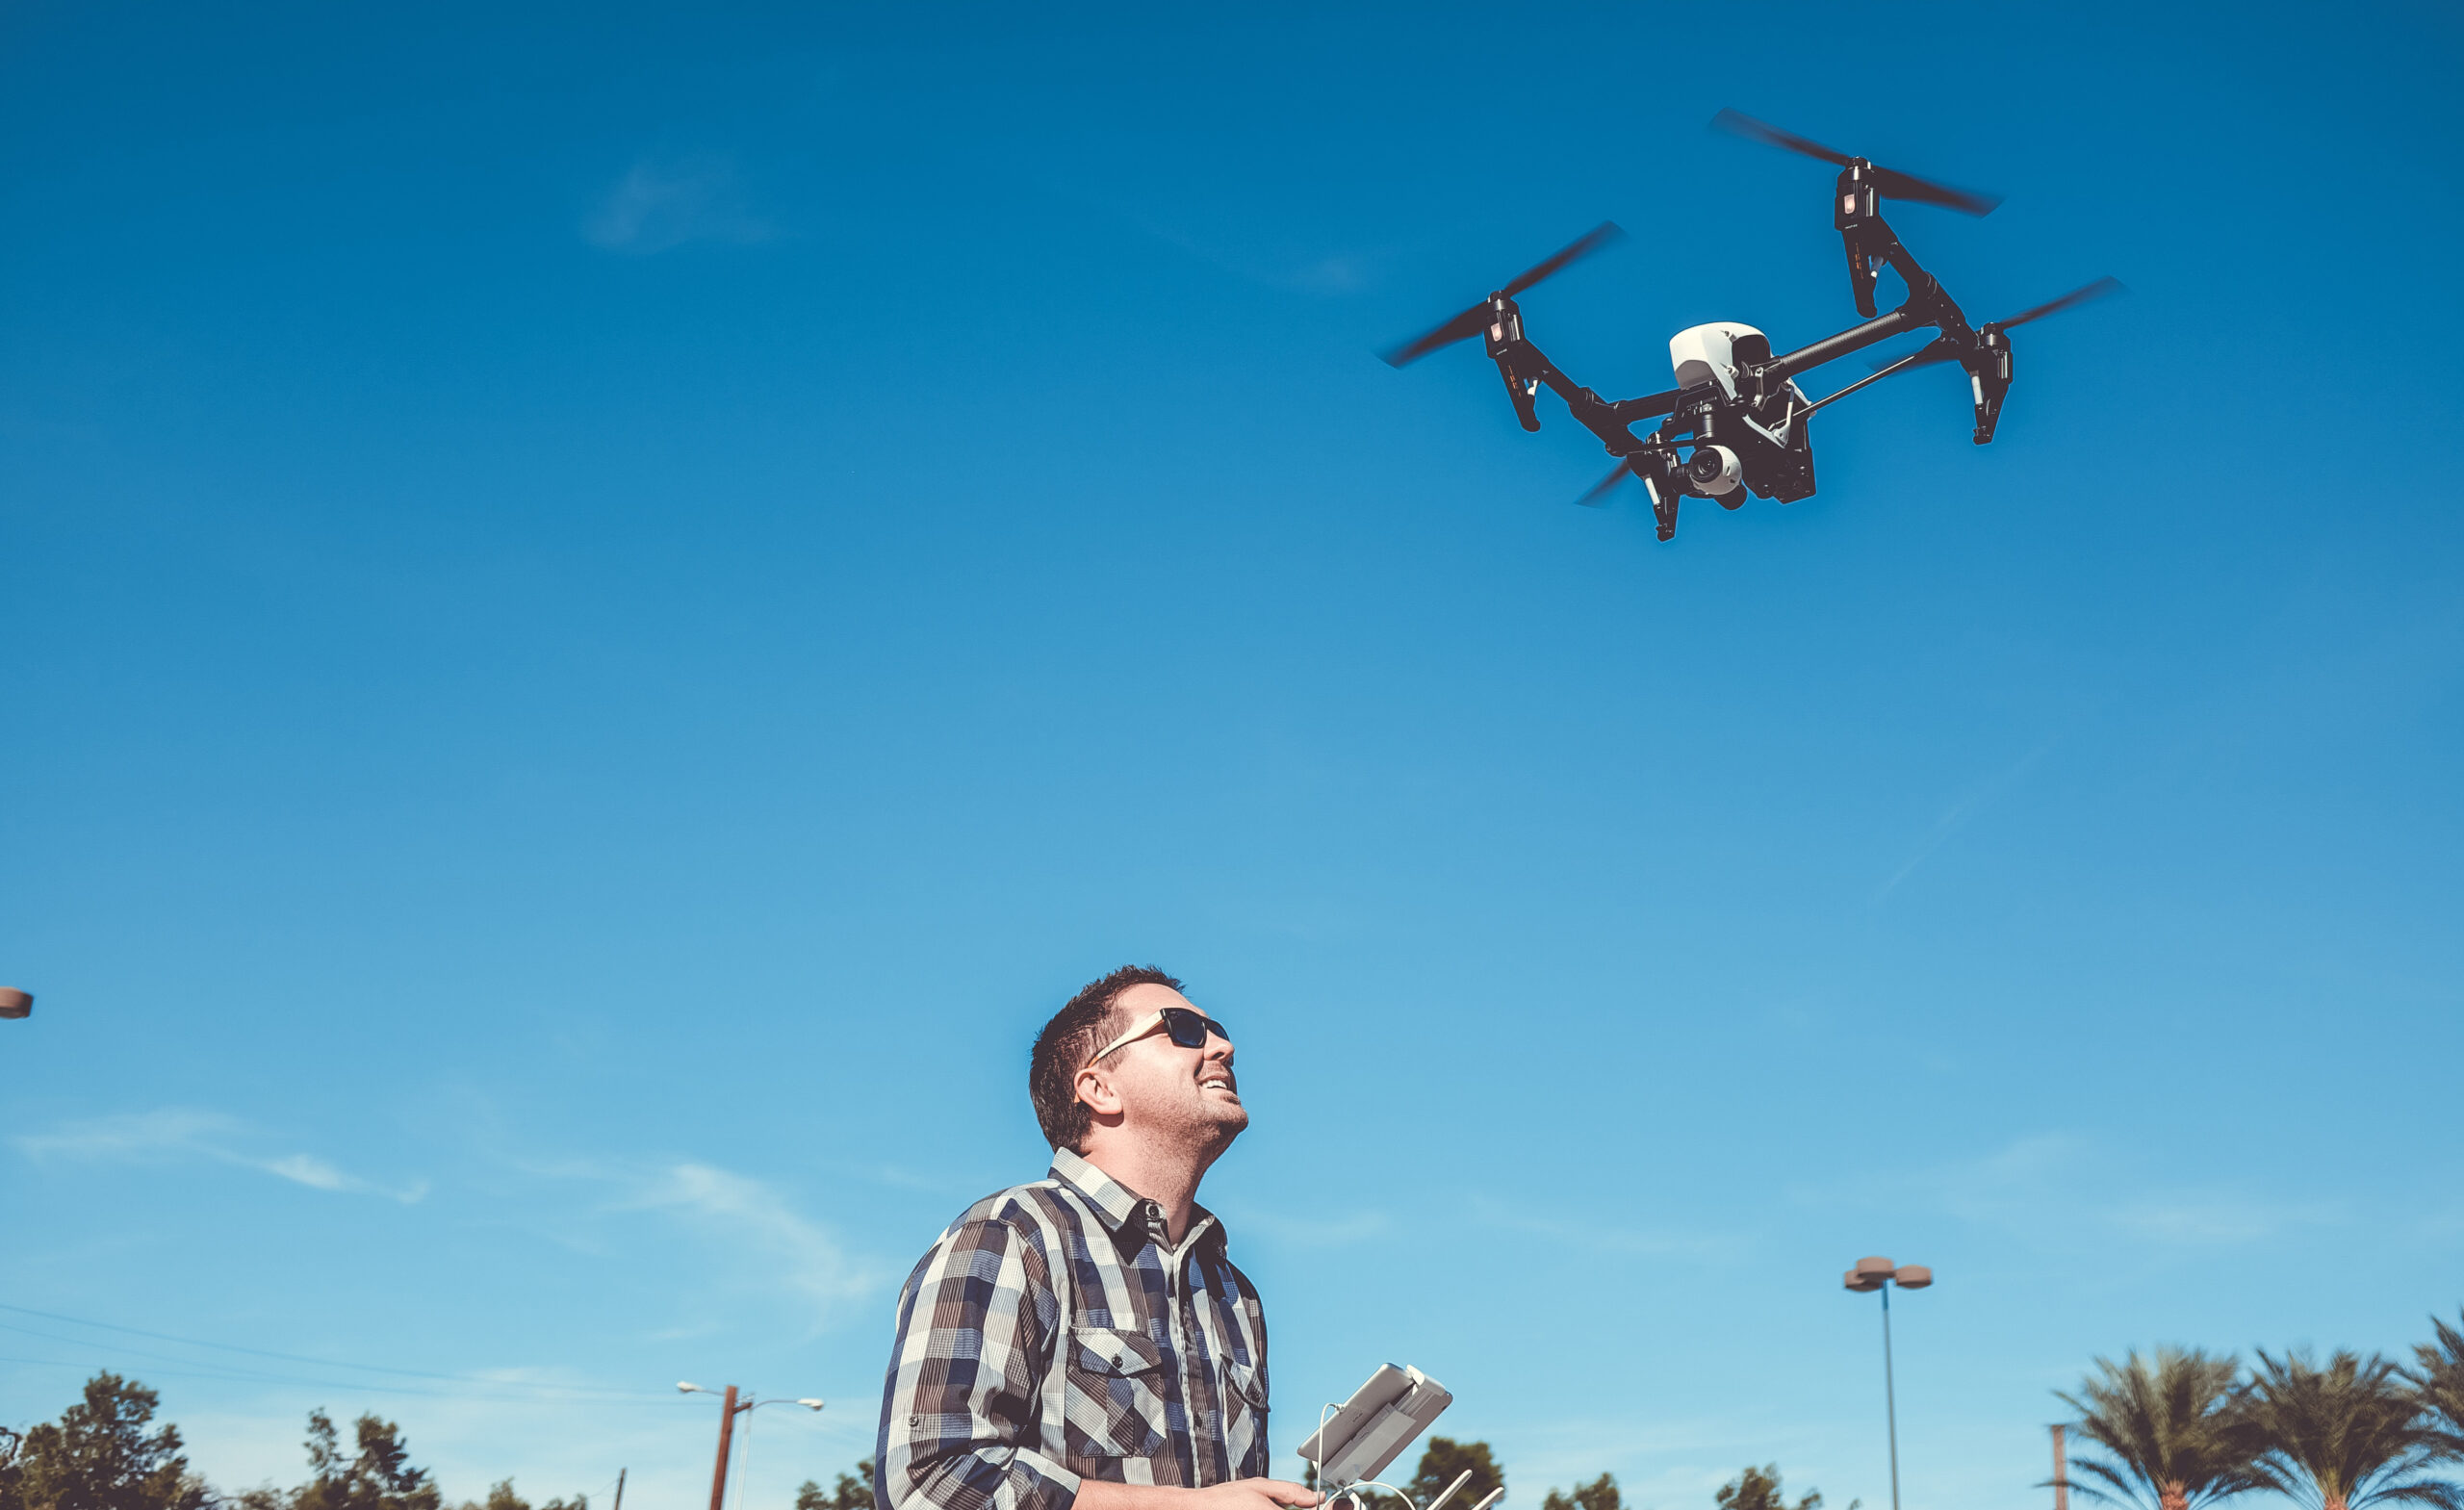 Make Money While Flying Drones